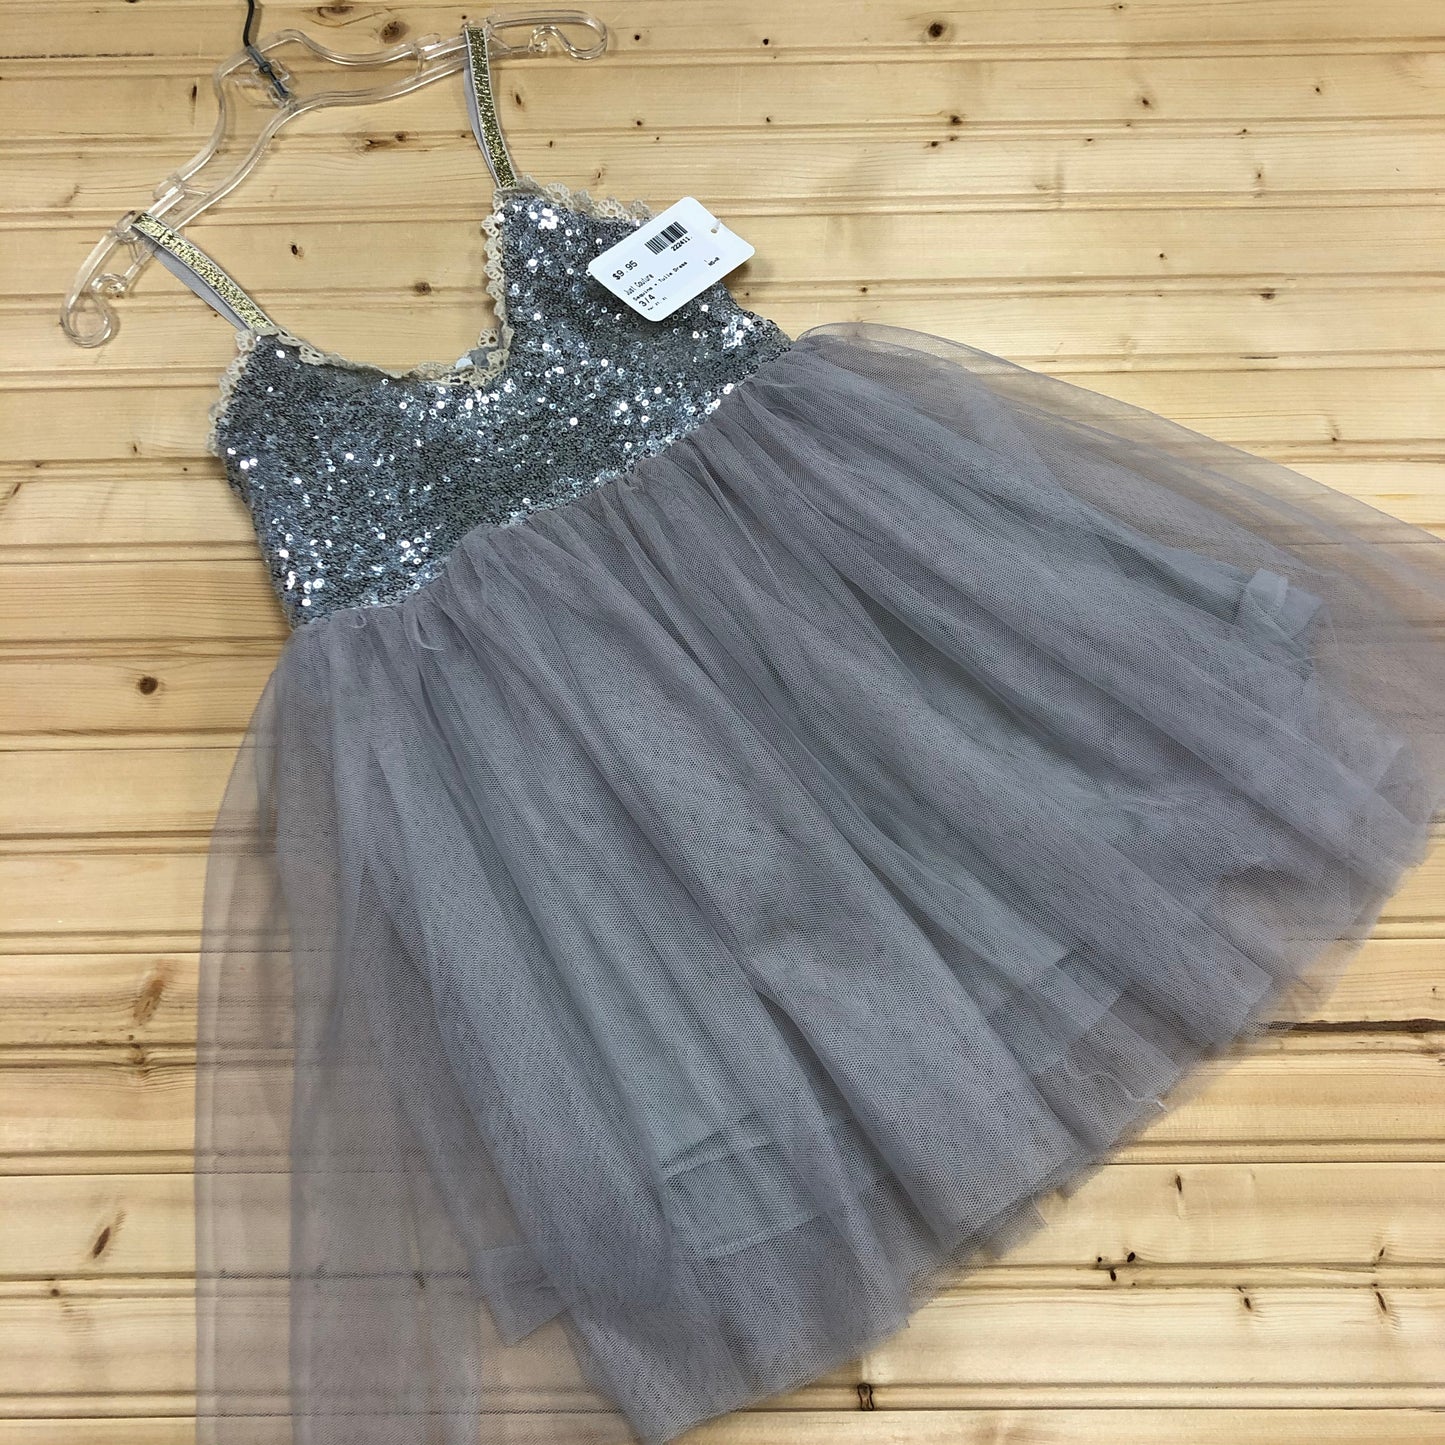 Sequins + Tulle Dress